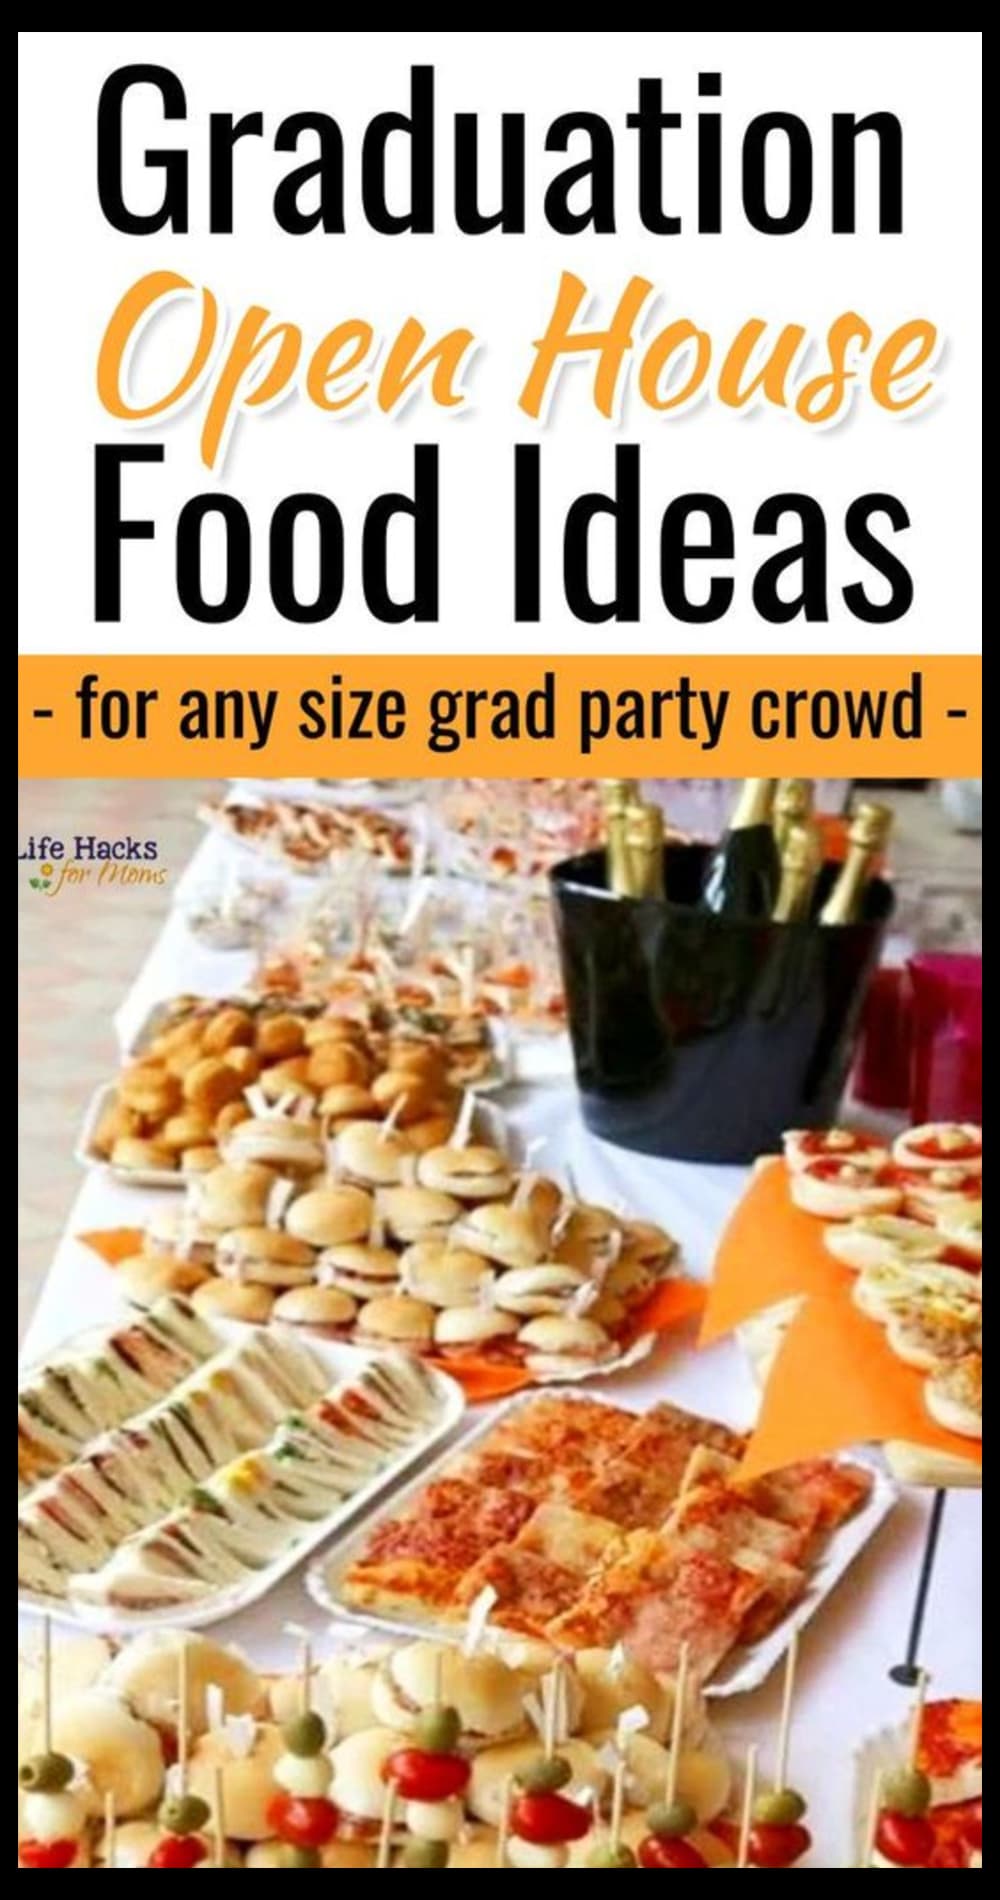 Graduation food ideas for an open house grad party on a budget